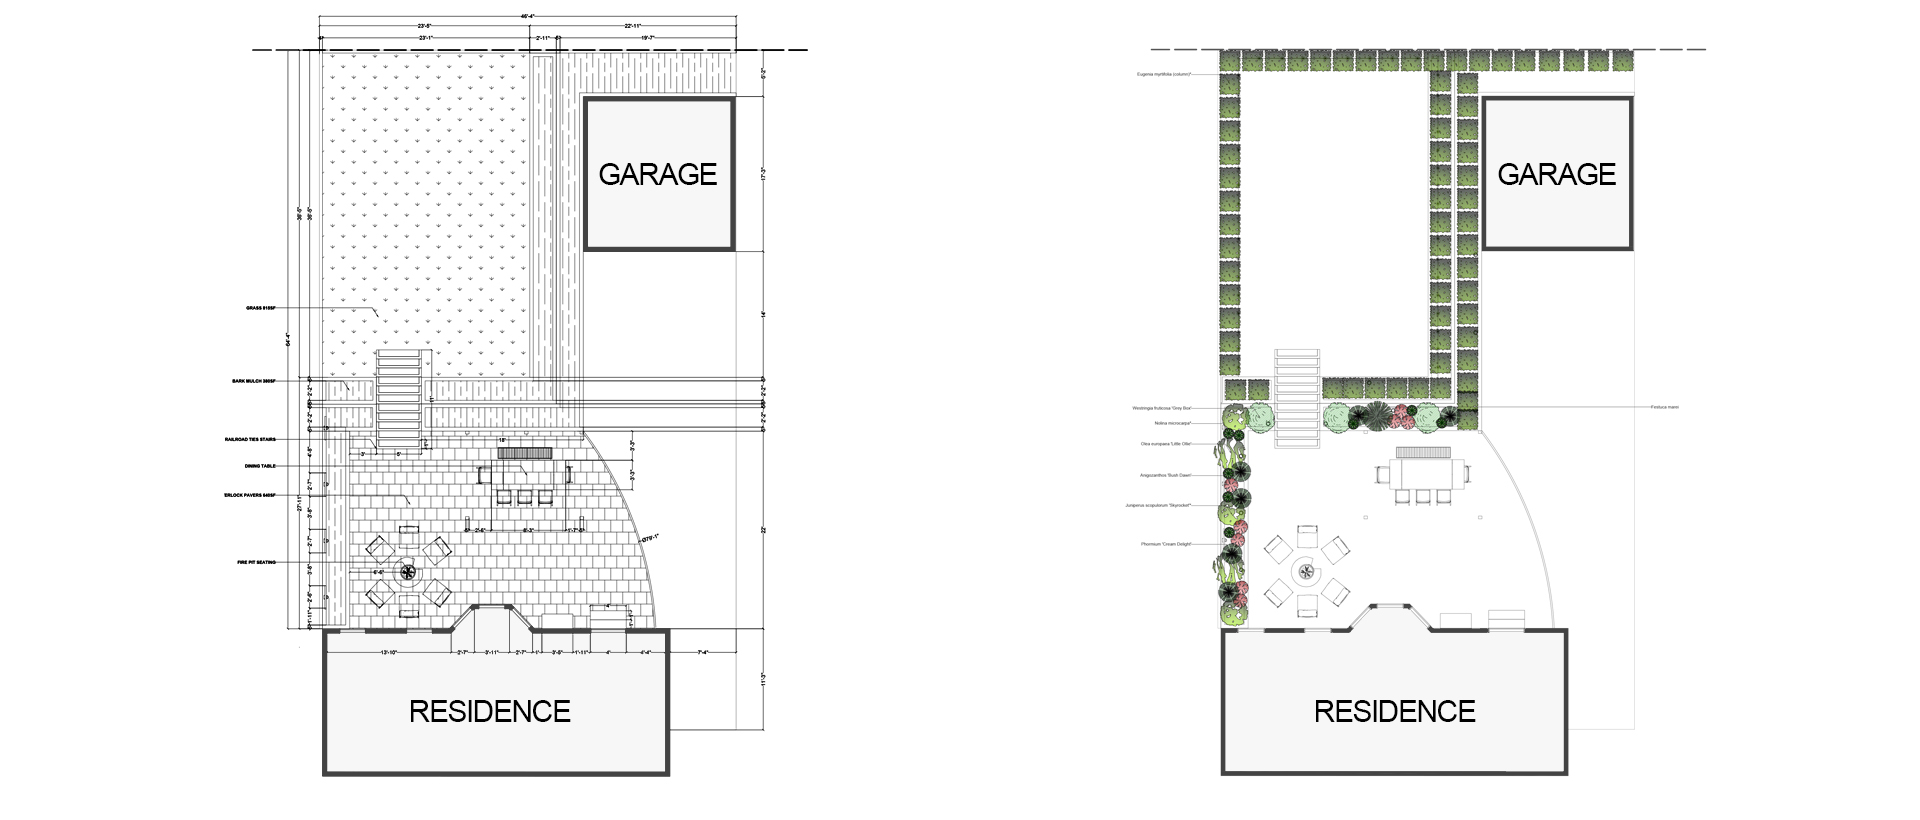 Architectural layout plans of a backyard design with detailed planting and hardscape areas adjacent to a residence and garage